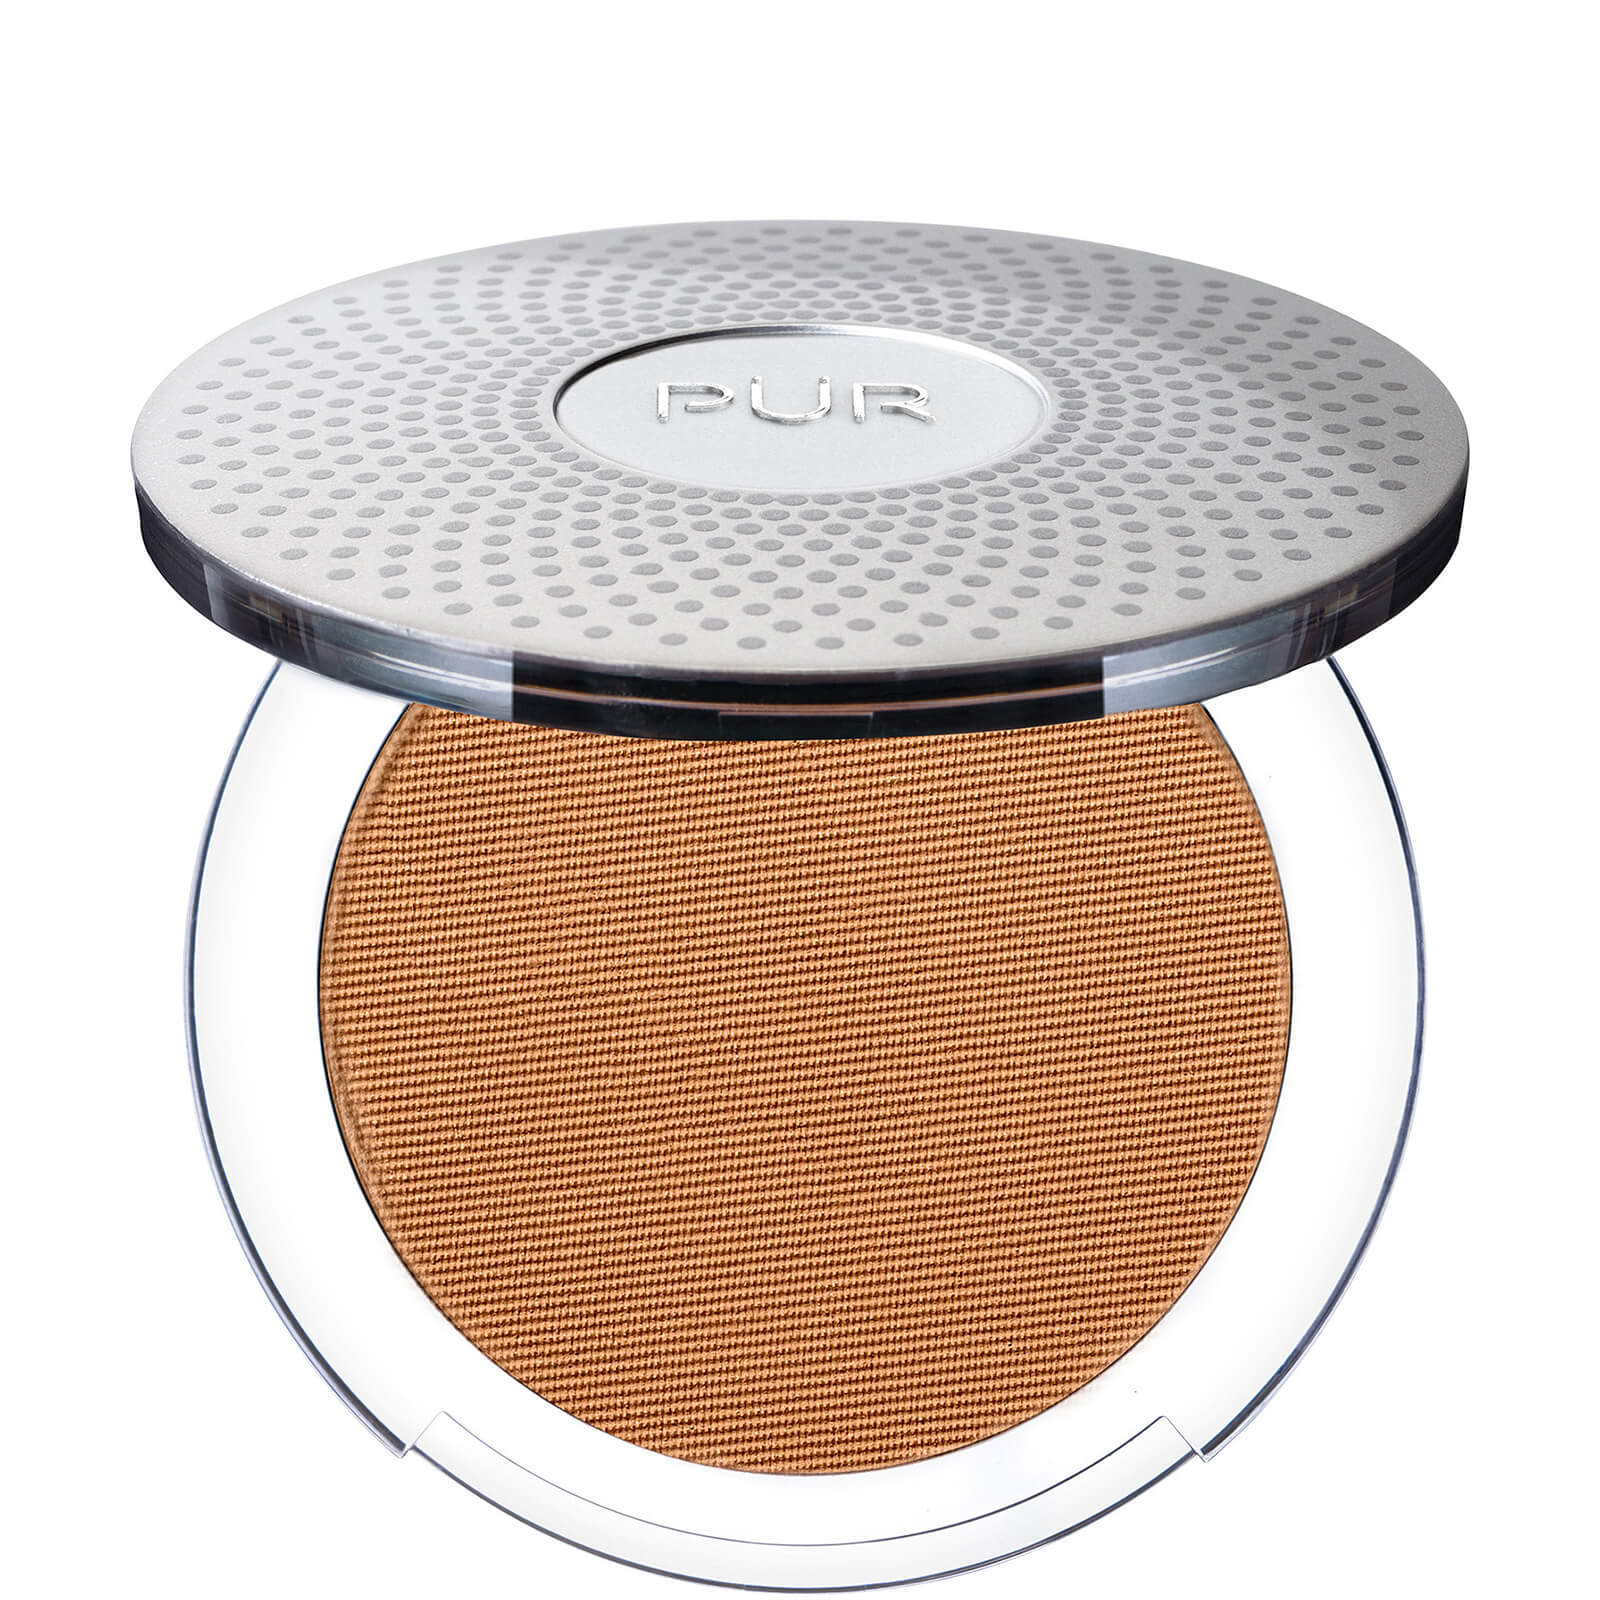 PÜR 4-in-1 Pressed Mineral Make-up 8g (Various Shades) - DN2/Nutmeg